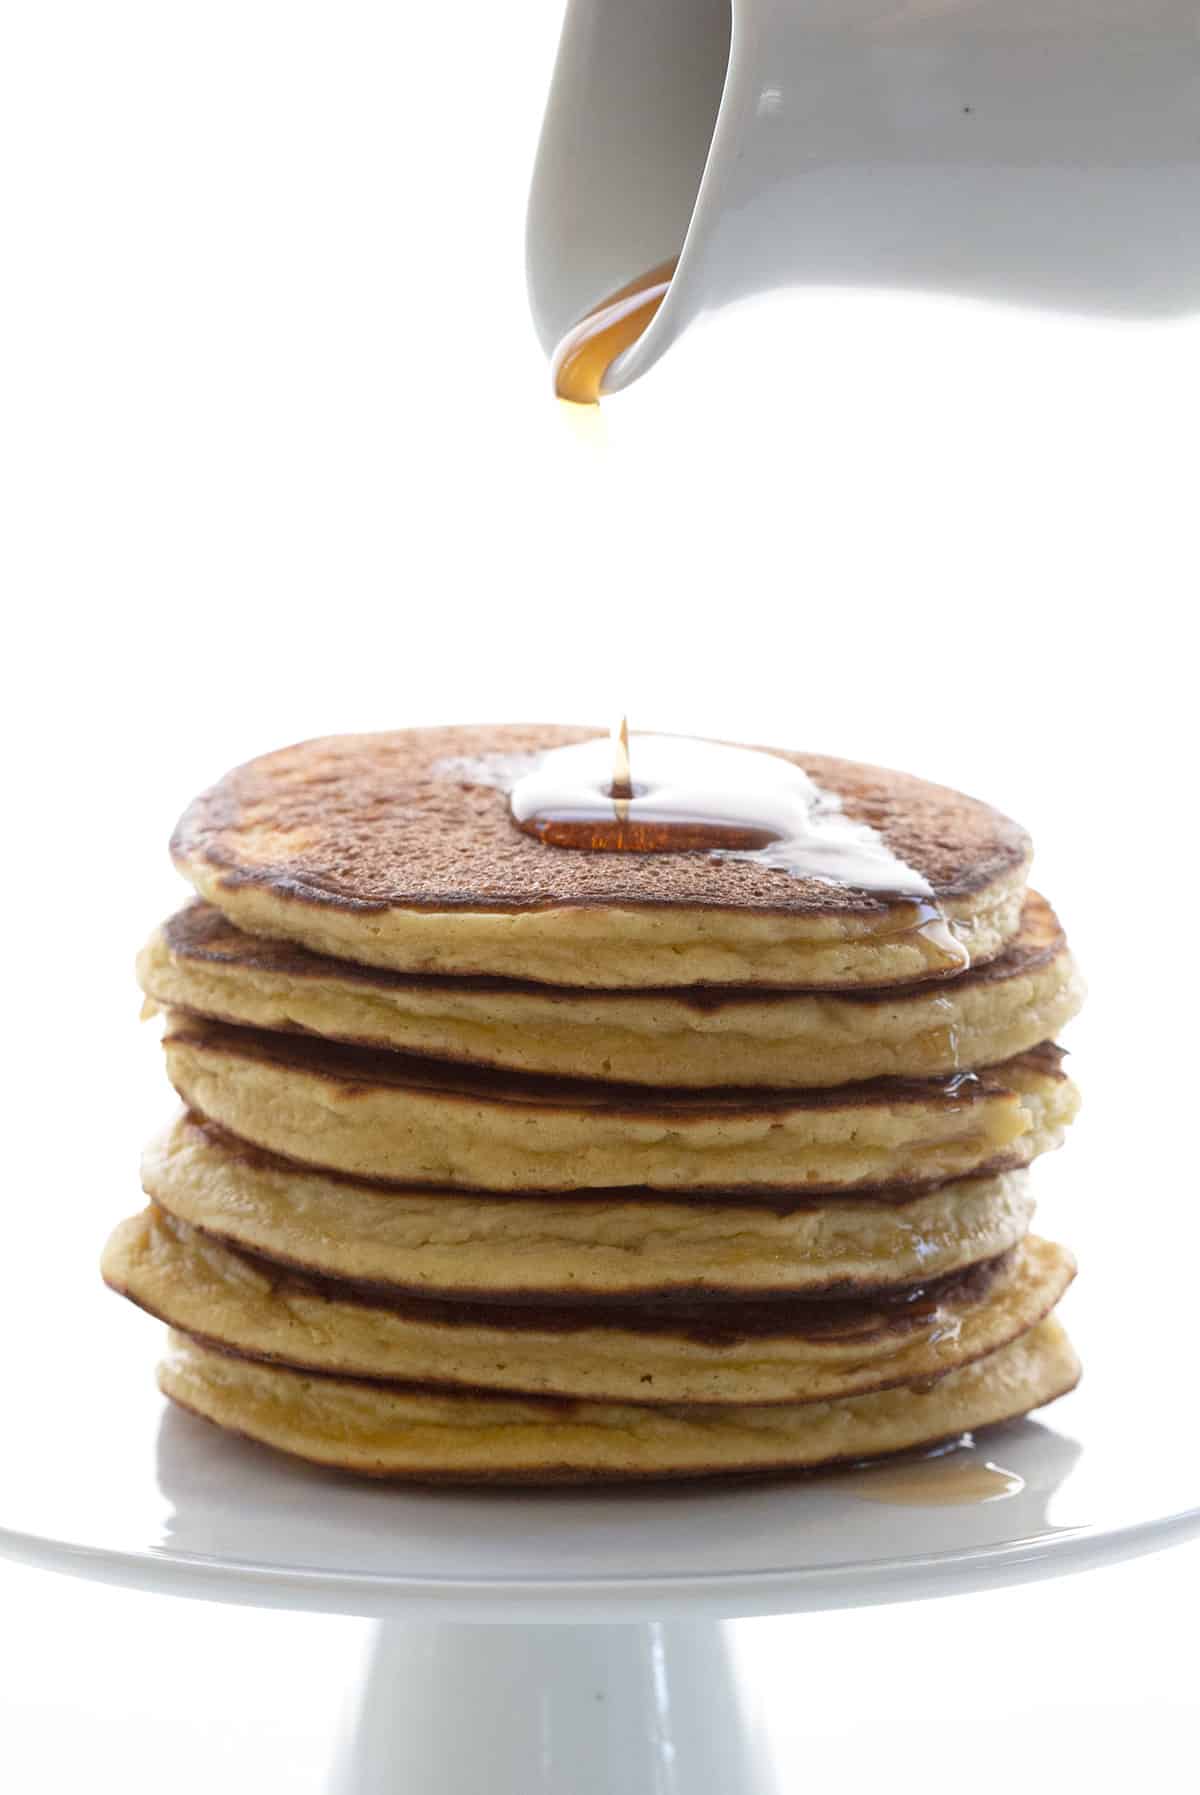 A stack of coconut flour pancakes on a cake stand with syrup being poured over top.